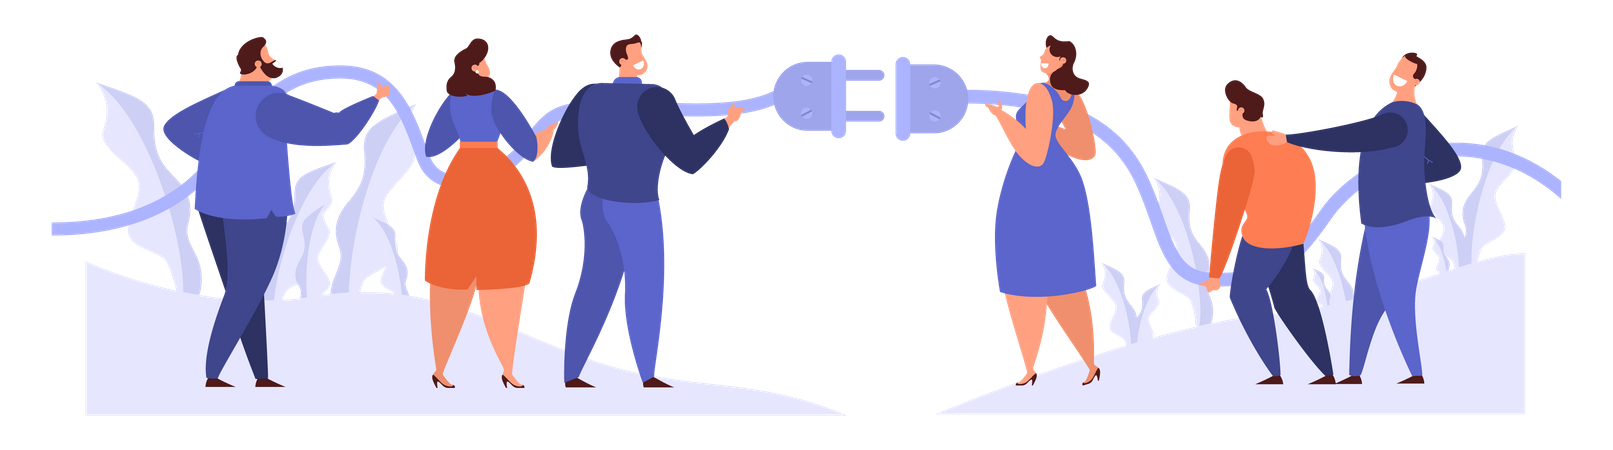 Cooperation between worker and partnership Illustration